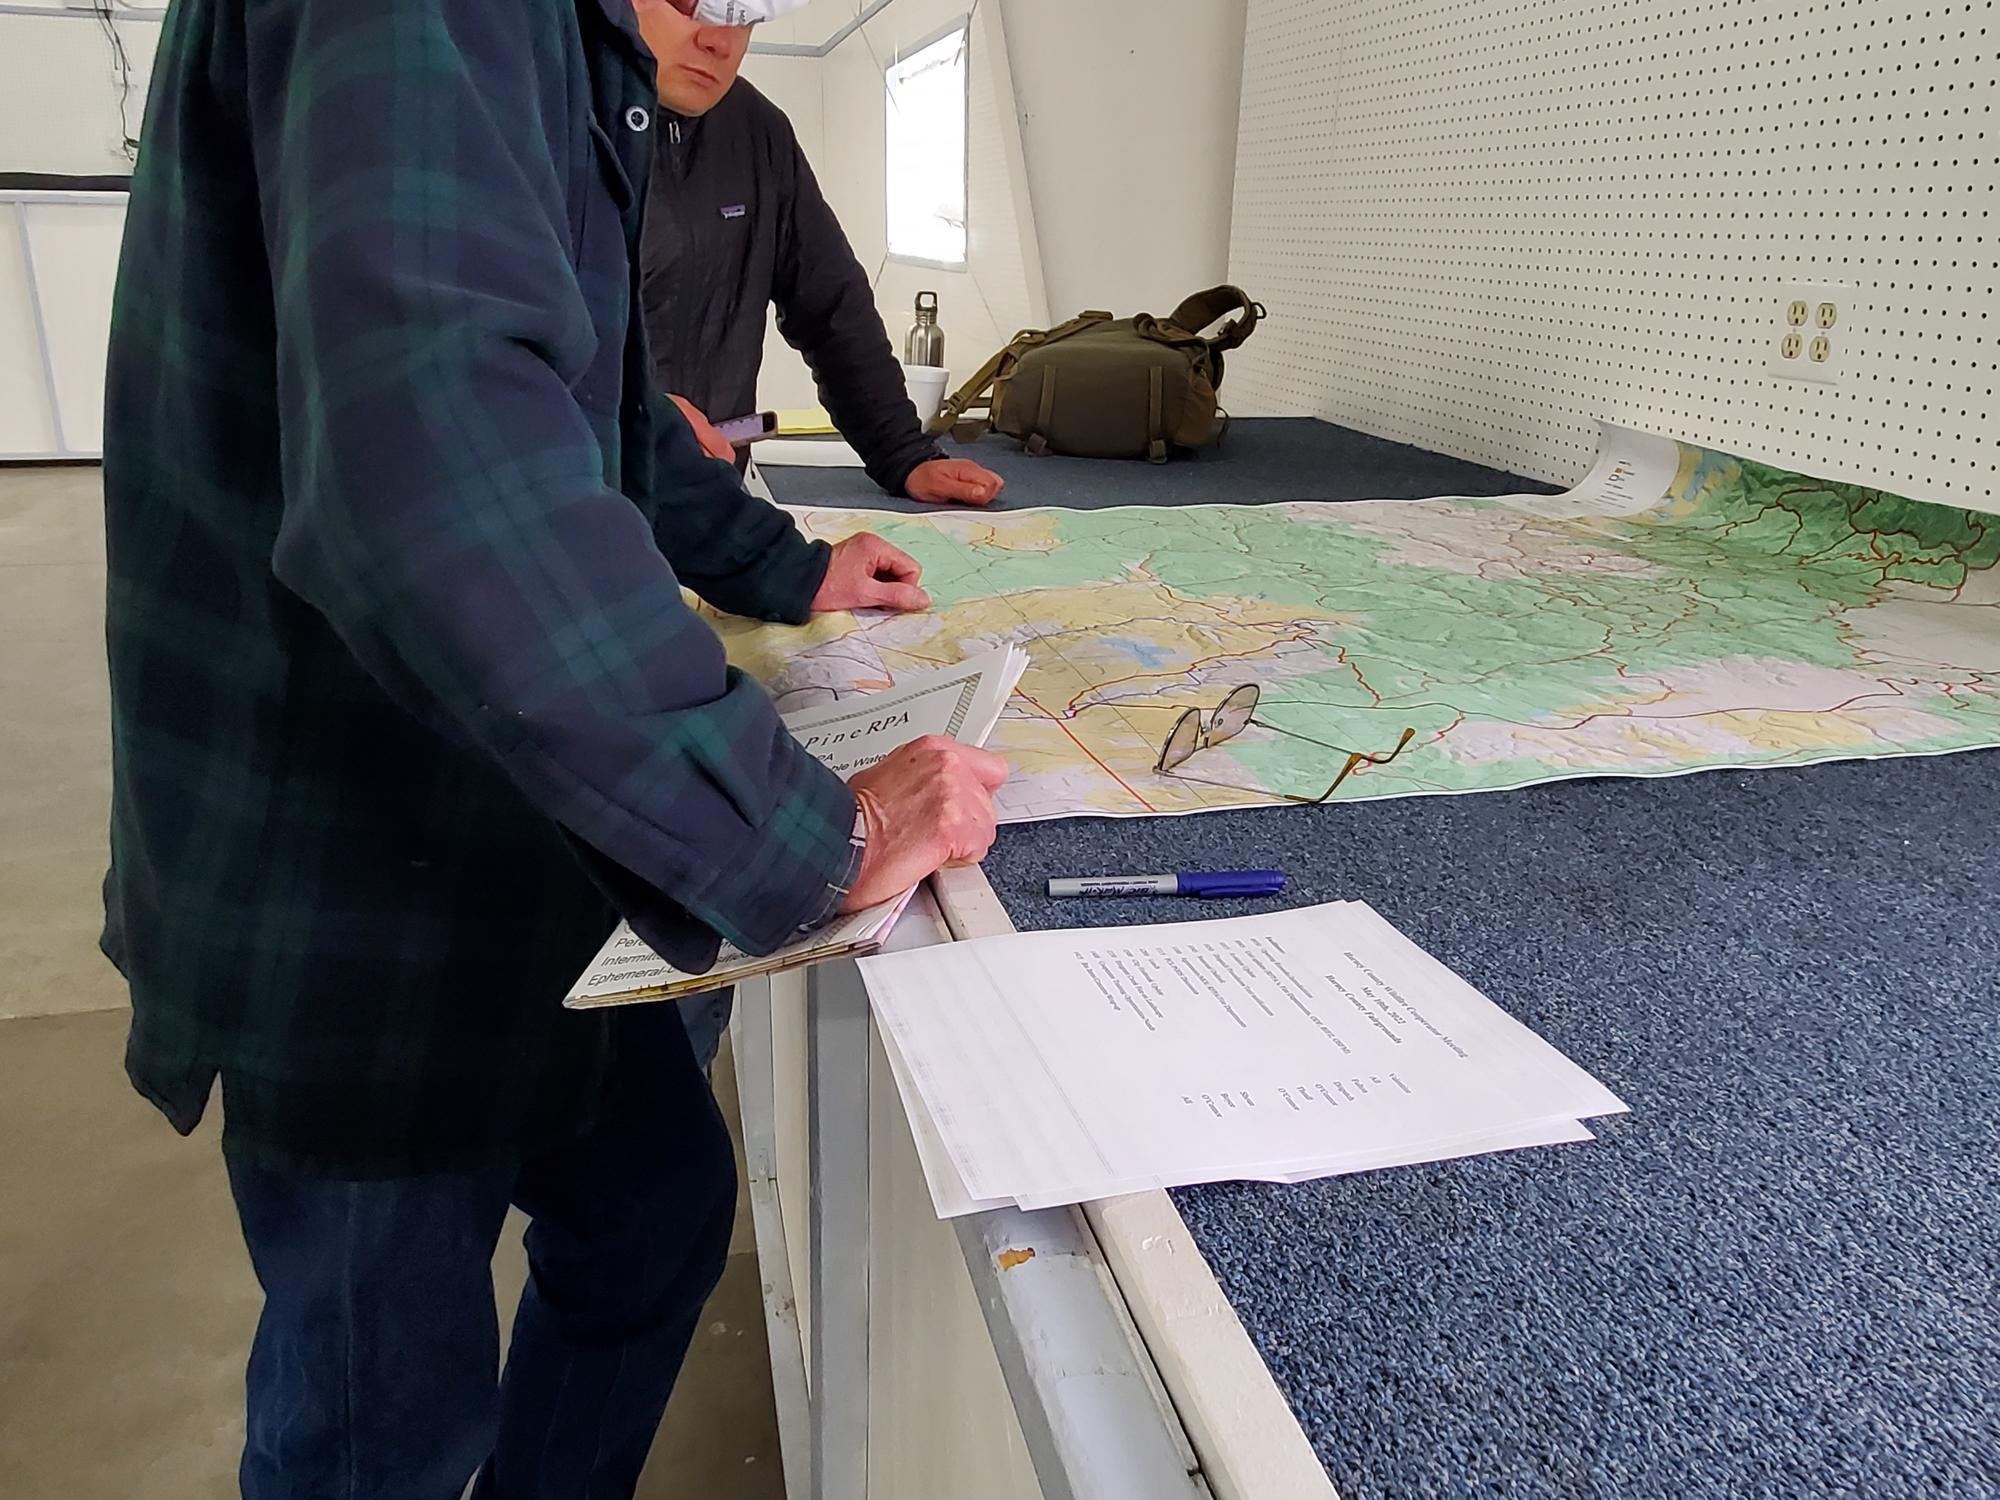 A landowner and agency staff discuss priorities for fuel treatments in an area.